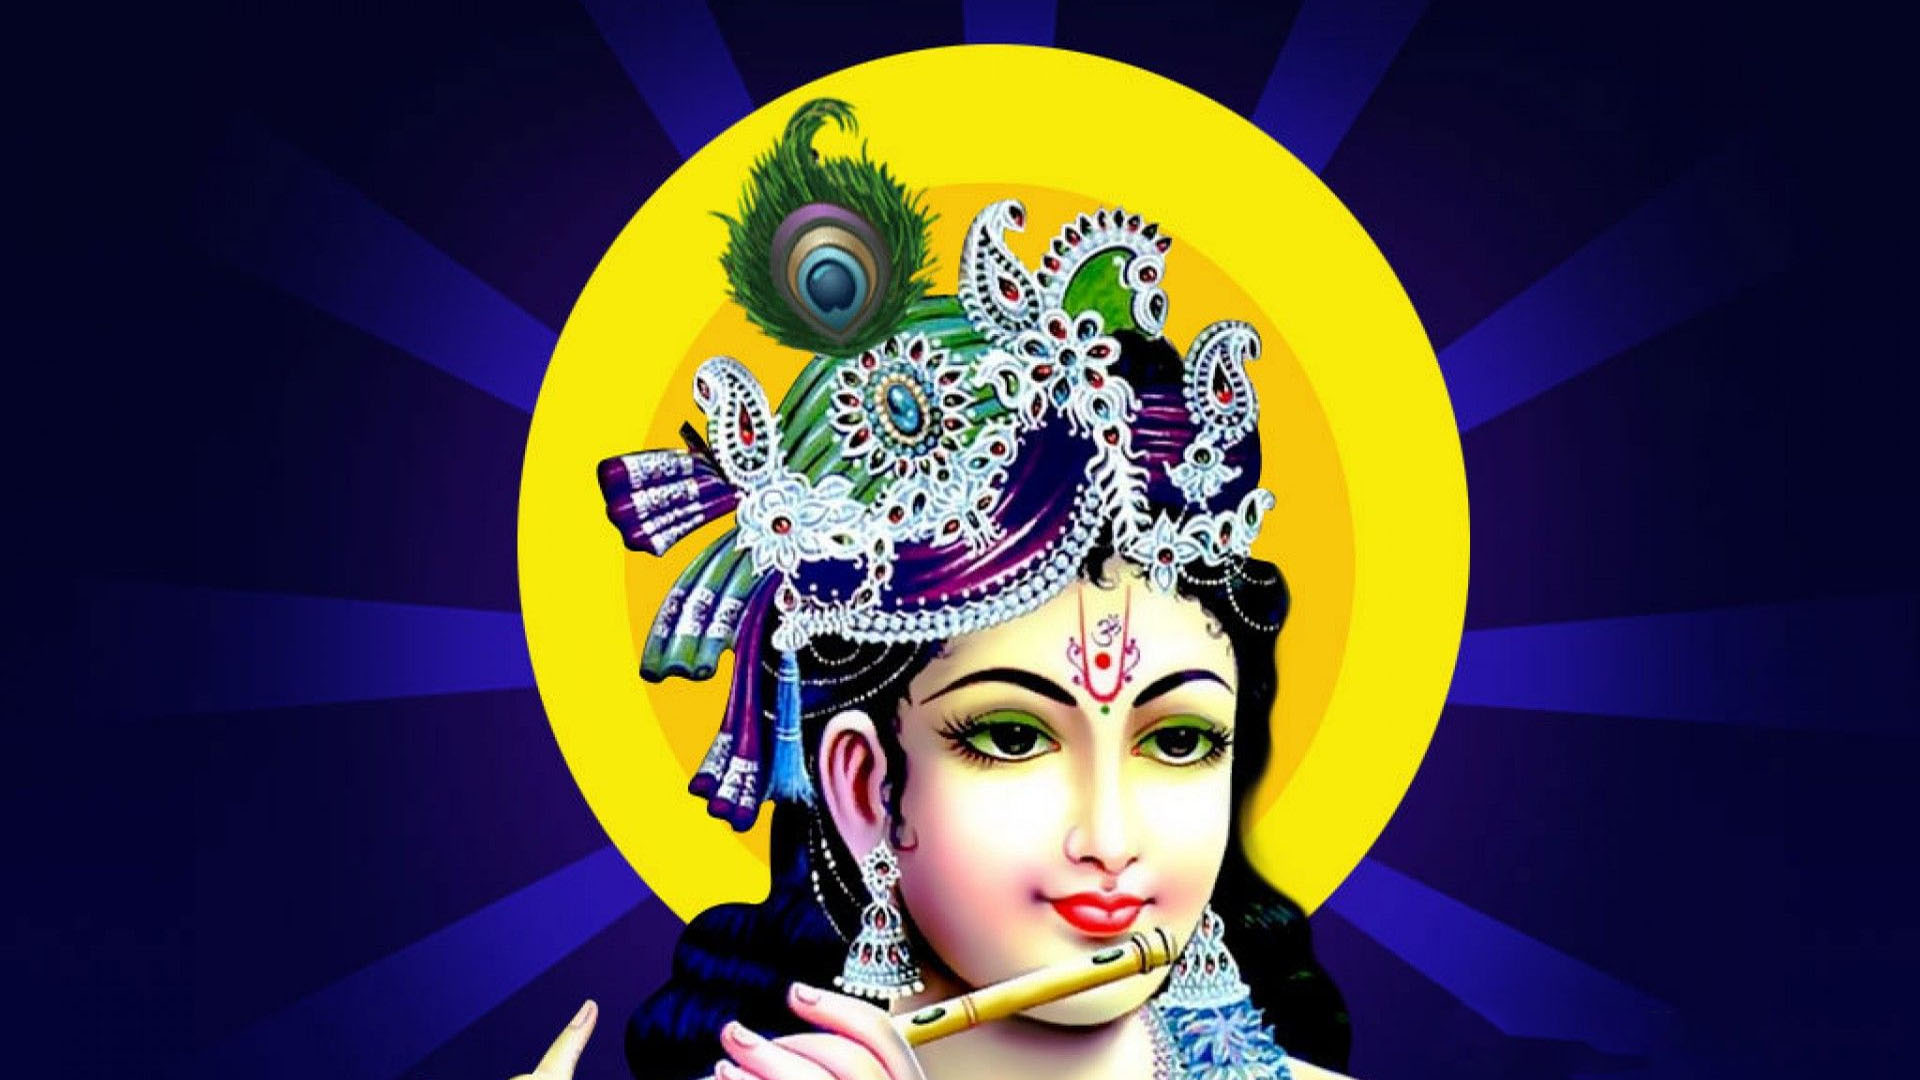 Lord Krishna Images Hd 1080P Wallpapers